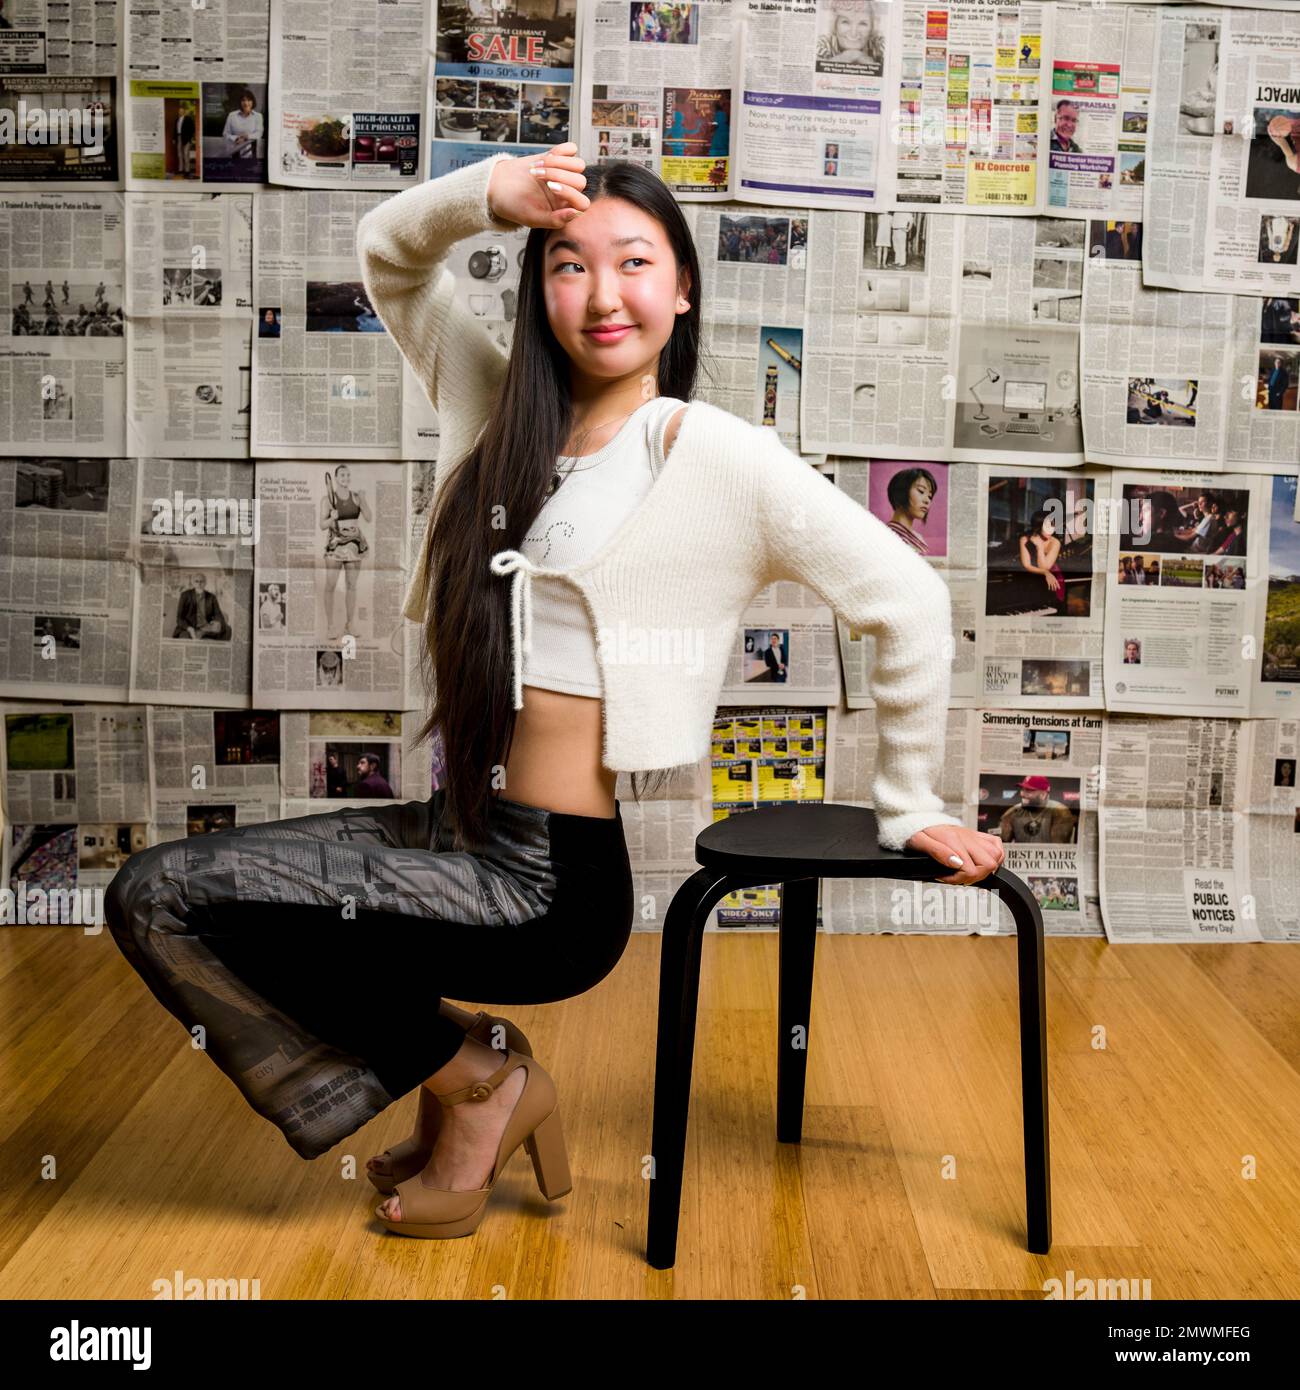 Full Body Tall Teenage Asian Girl Seated in Front of Backdrop of Newspapers Stock Photo